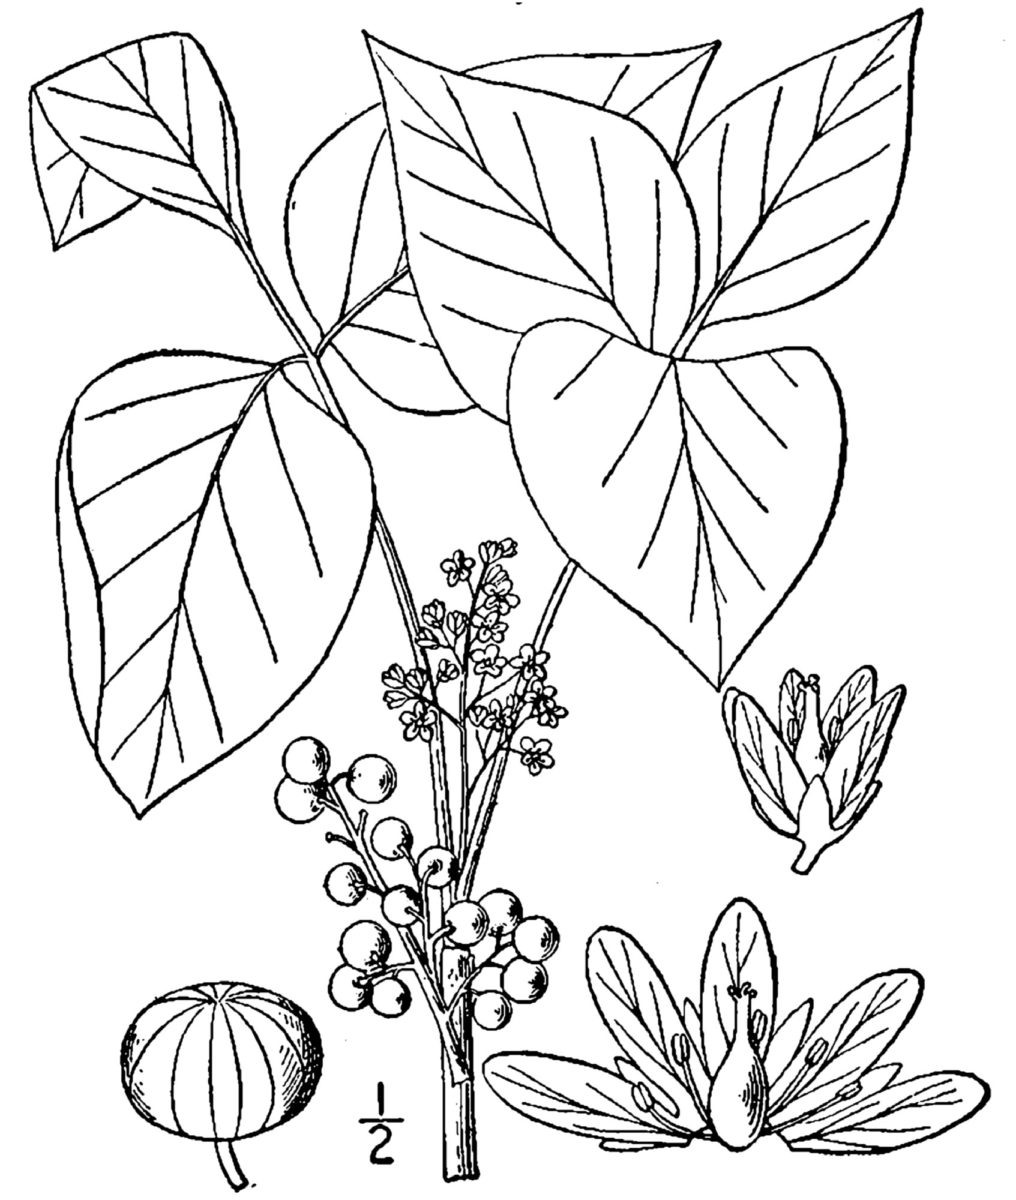 Plant Leaves And Berries